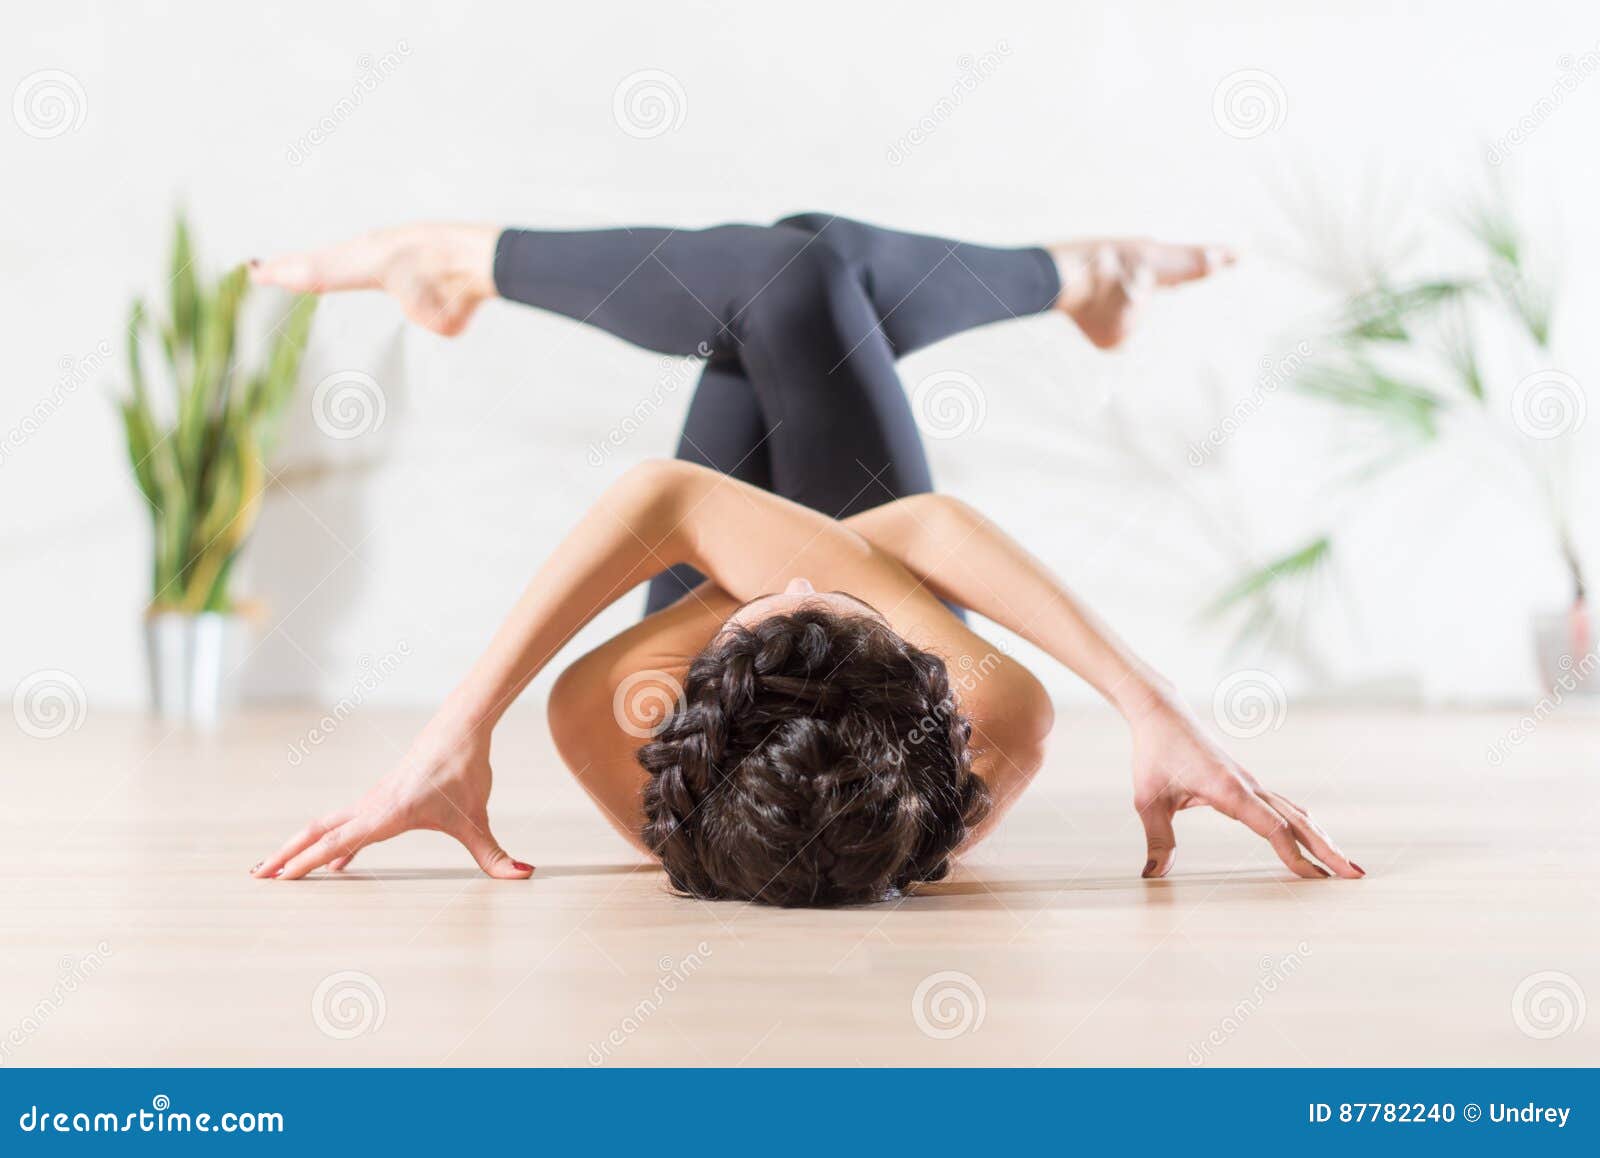 Prone Poses in Yoga: List of Prone Asanas, Benefits and Tips - Fitsri Yoga